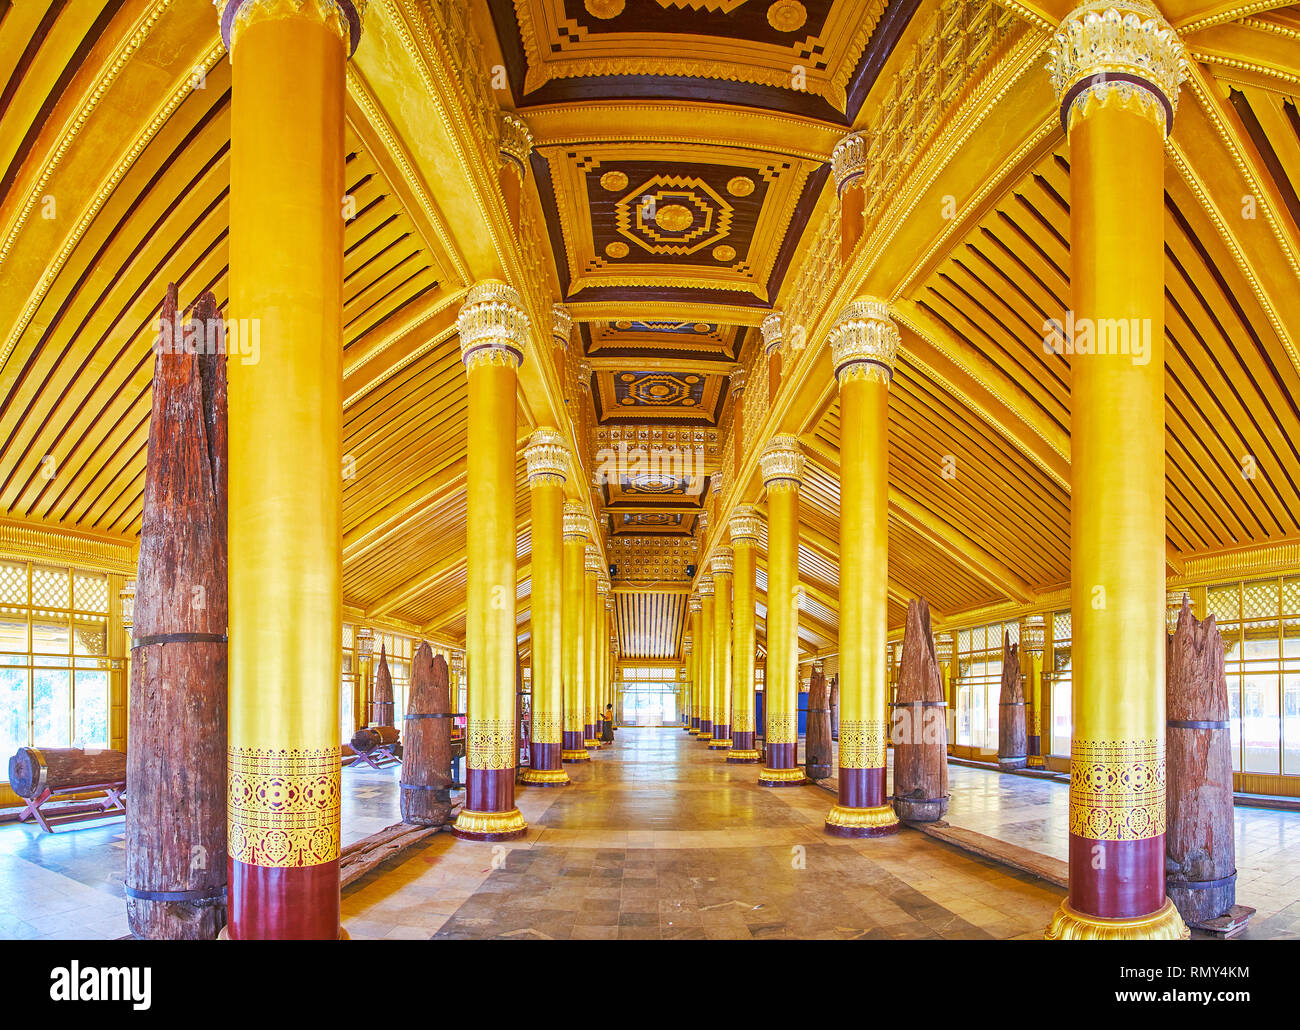 BAGO, MYANMAR - FEBRUARY 15, 2018: The Great Audience Hall (Lion Throne Hall) of Kanbawzathadi Golden palace is famous for its splendid interior with  Stock Photo